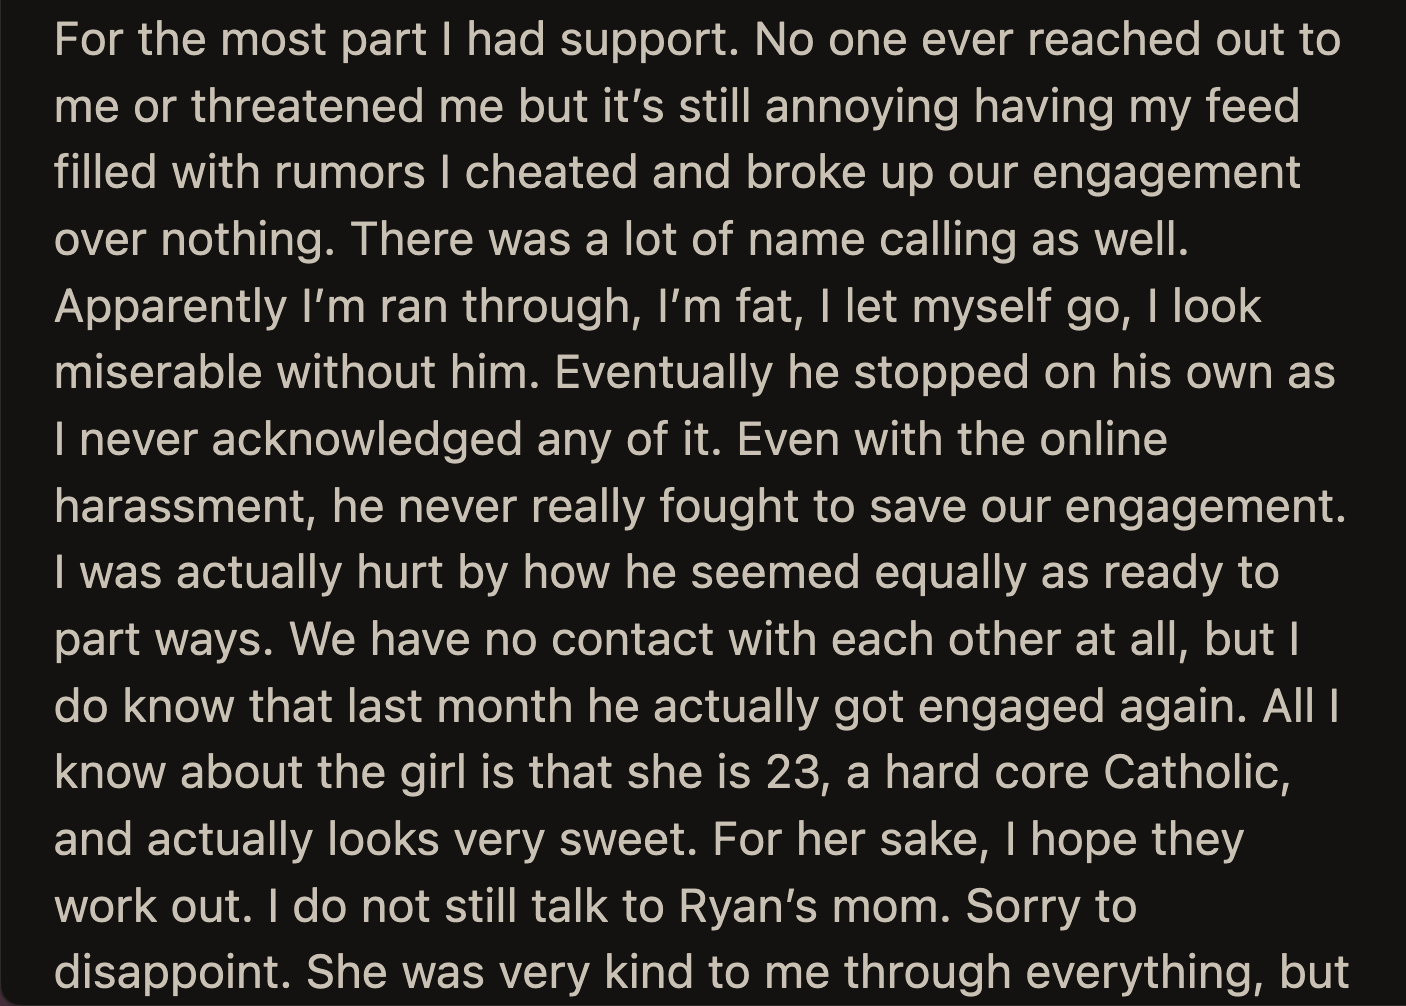 In peak misogynistic fashion, Ryan, naturally, badmouthed OP online after their breakup. He stopped when OP ignored all of his posts. He eventually got engaged to a religious woman.